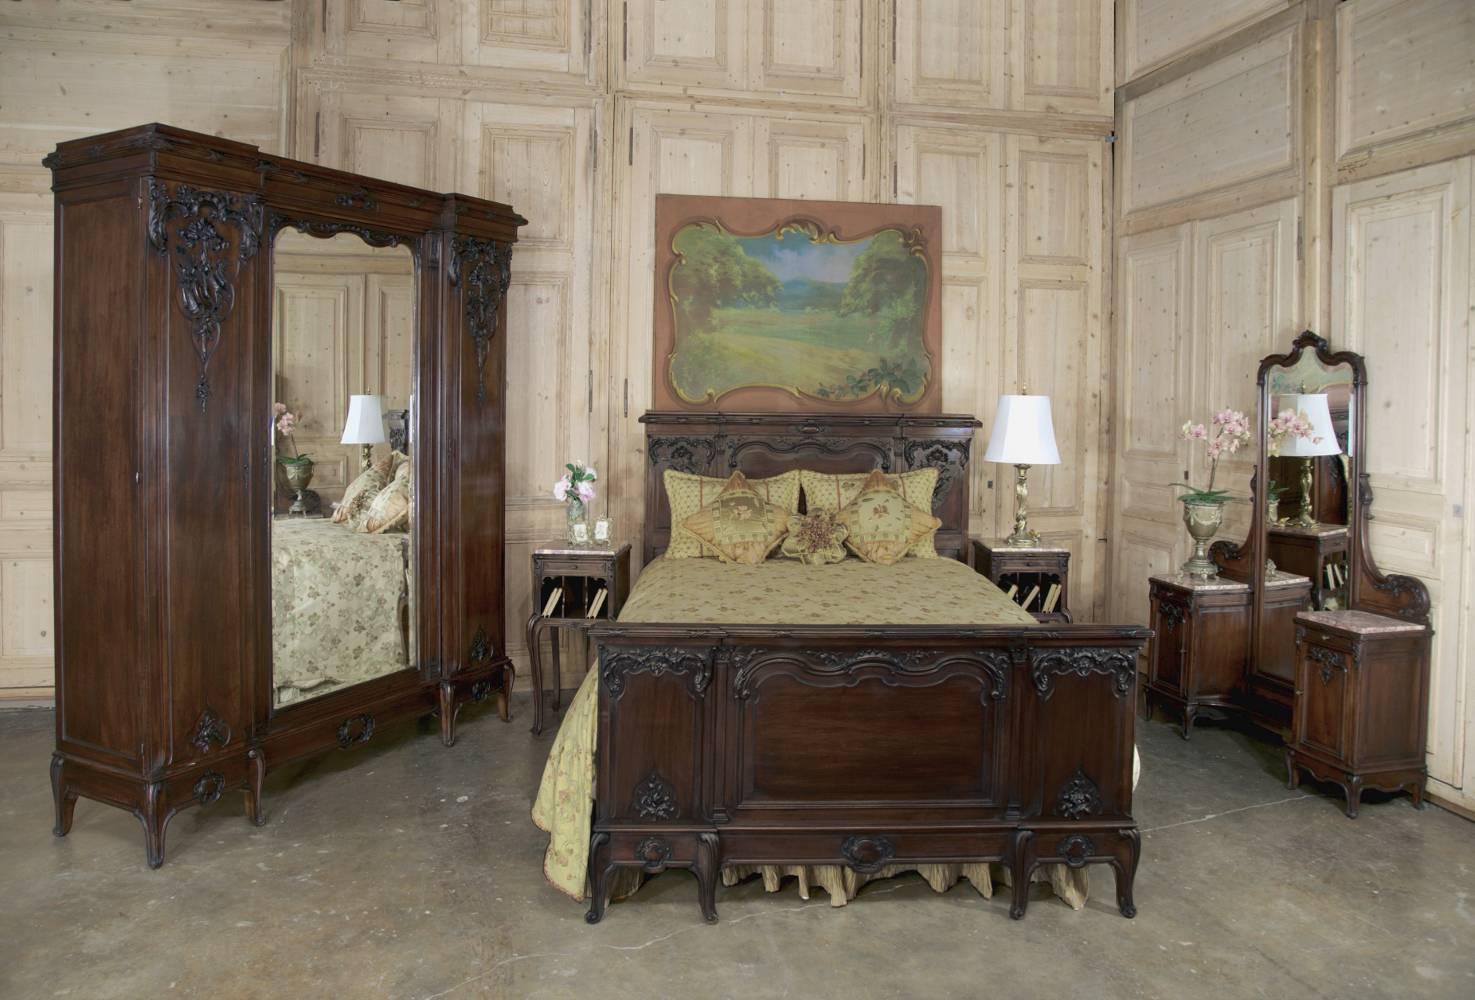 Stunning 19th century French walnut neoclassical bedroom set includes a stately triple armoire, a Queen bed ~ a pair of marble top nightstands and a dresser/vanity with full length dressing mirror and two marble top cabinets! Proudly hand-crafted by